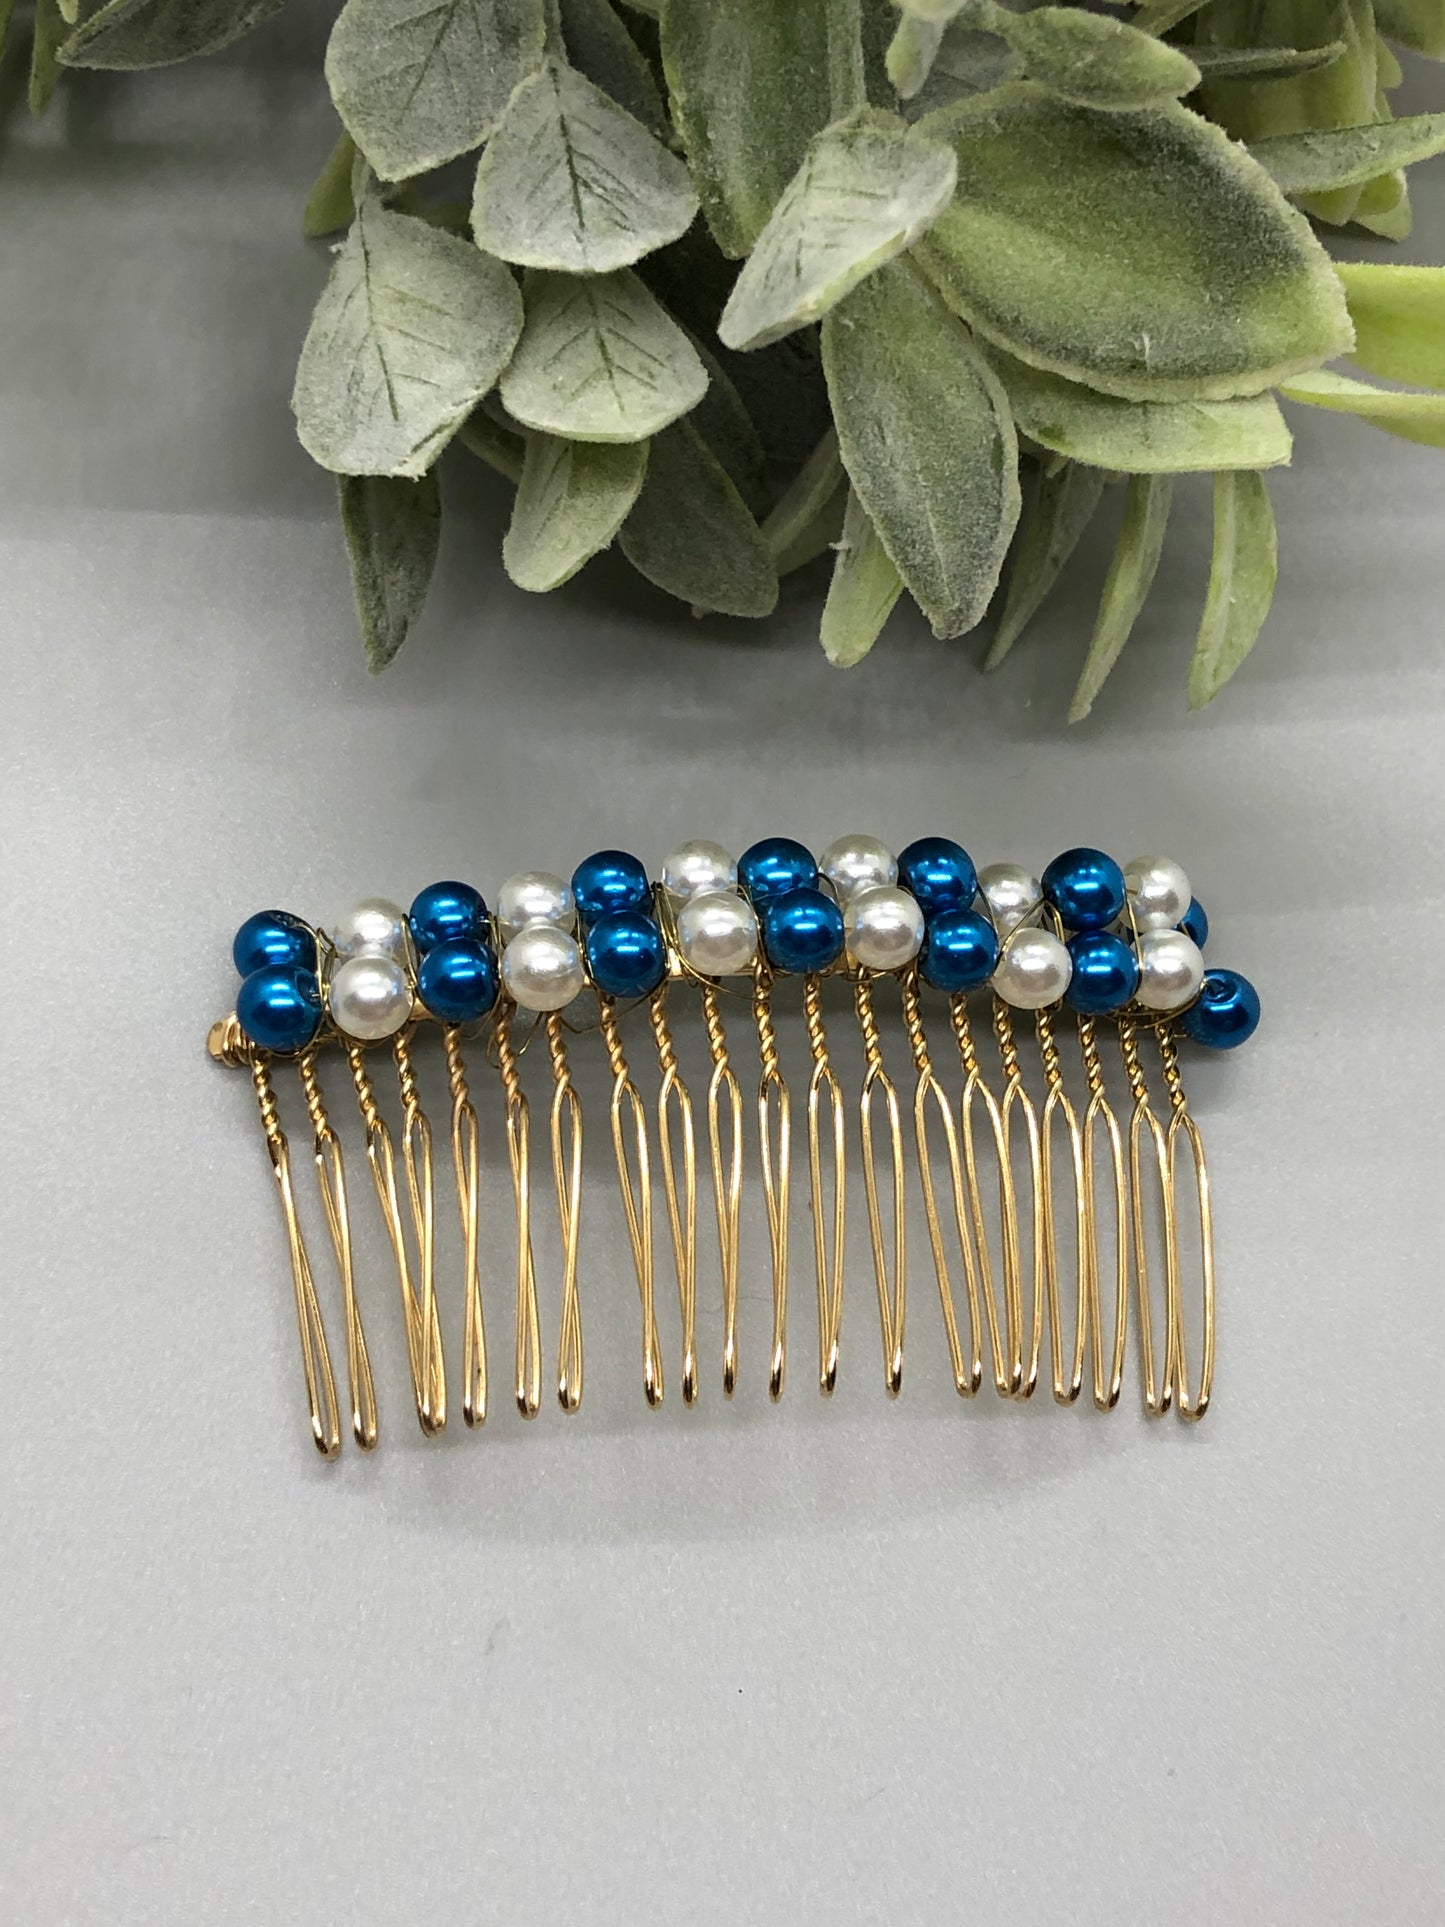 Blue White 2 rows Beaded Hair Comb on 3.5' Gold Tone Metal Side Comb wedding engagement birthday princess bridesmaid formal hair accessory accessories